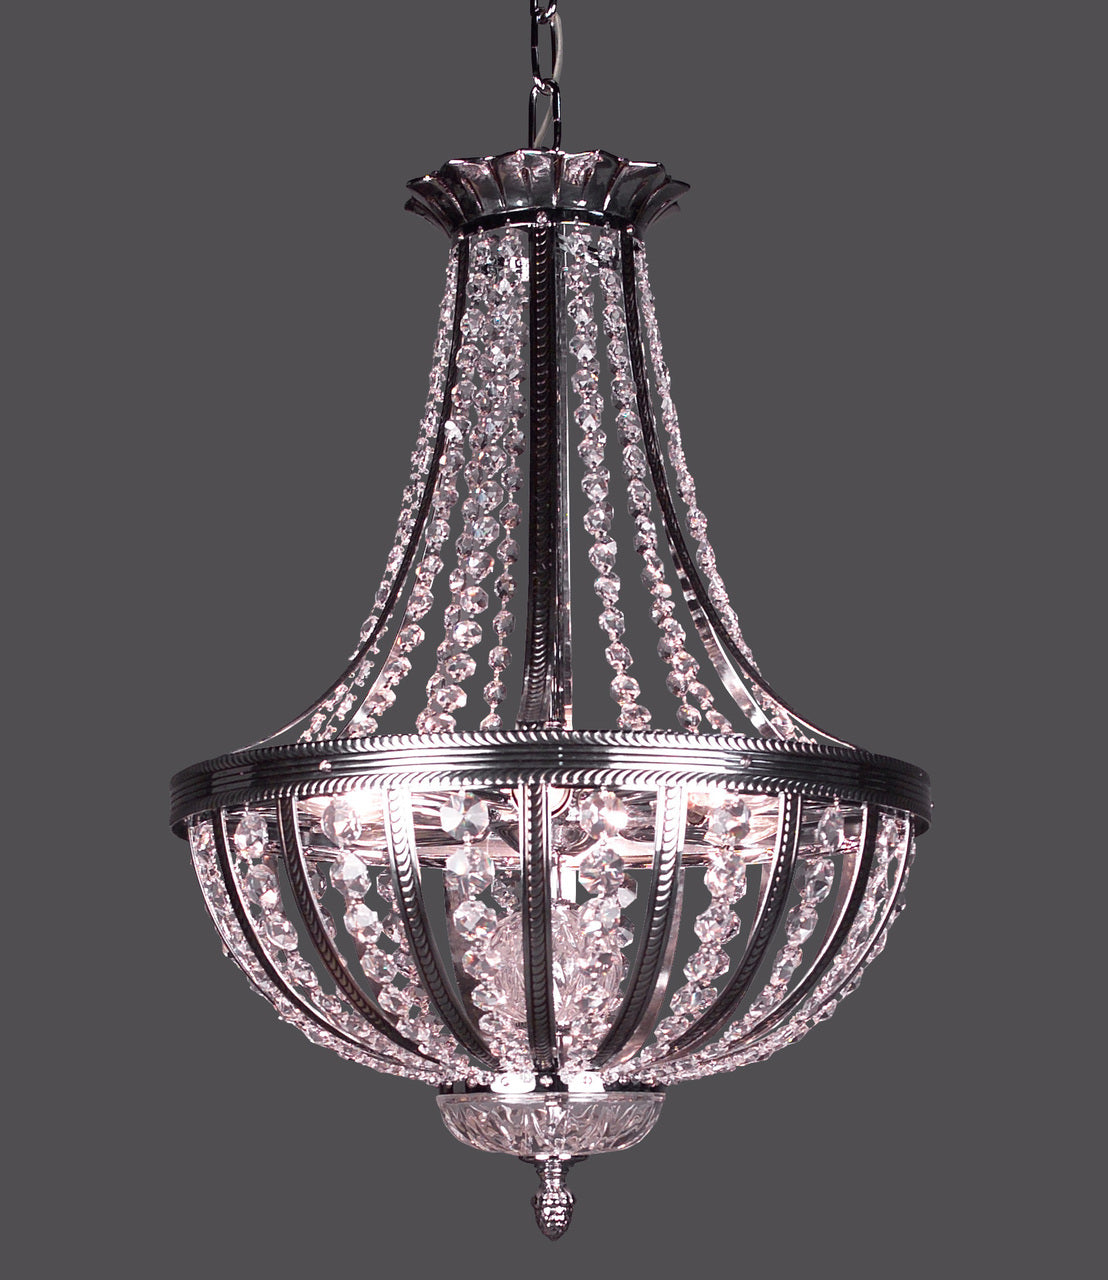 Classic Lighting 1924 CHB SC Terragona Crystal Pendant in Chrome/Black Patina (Imported from Spain)